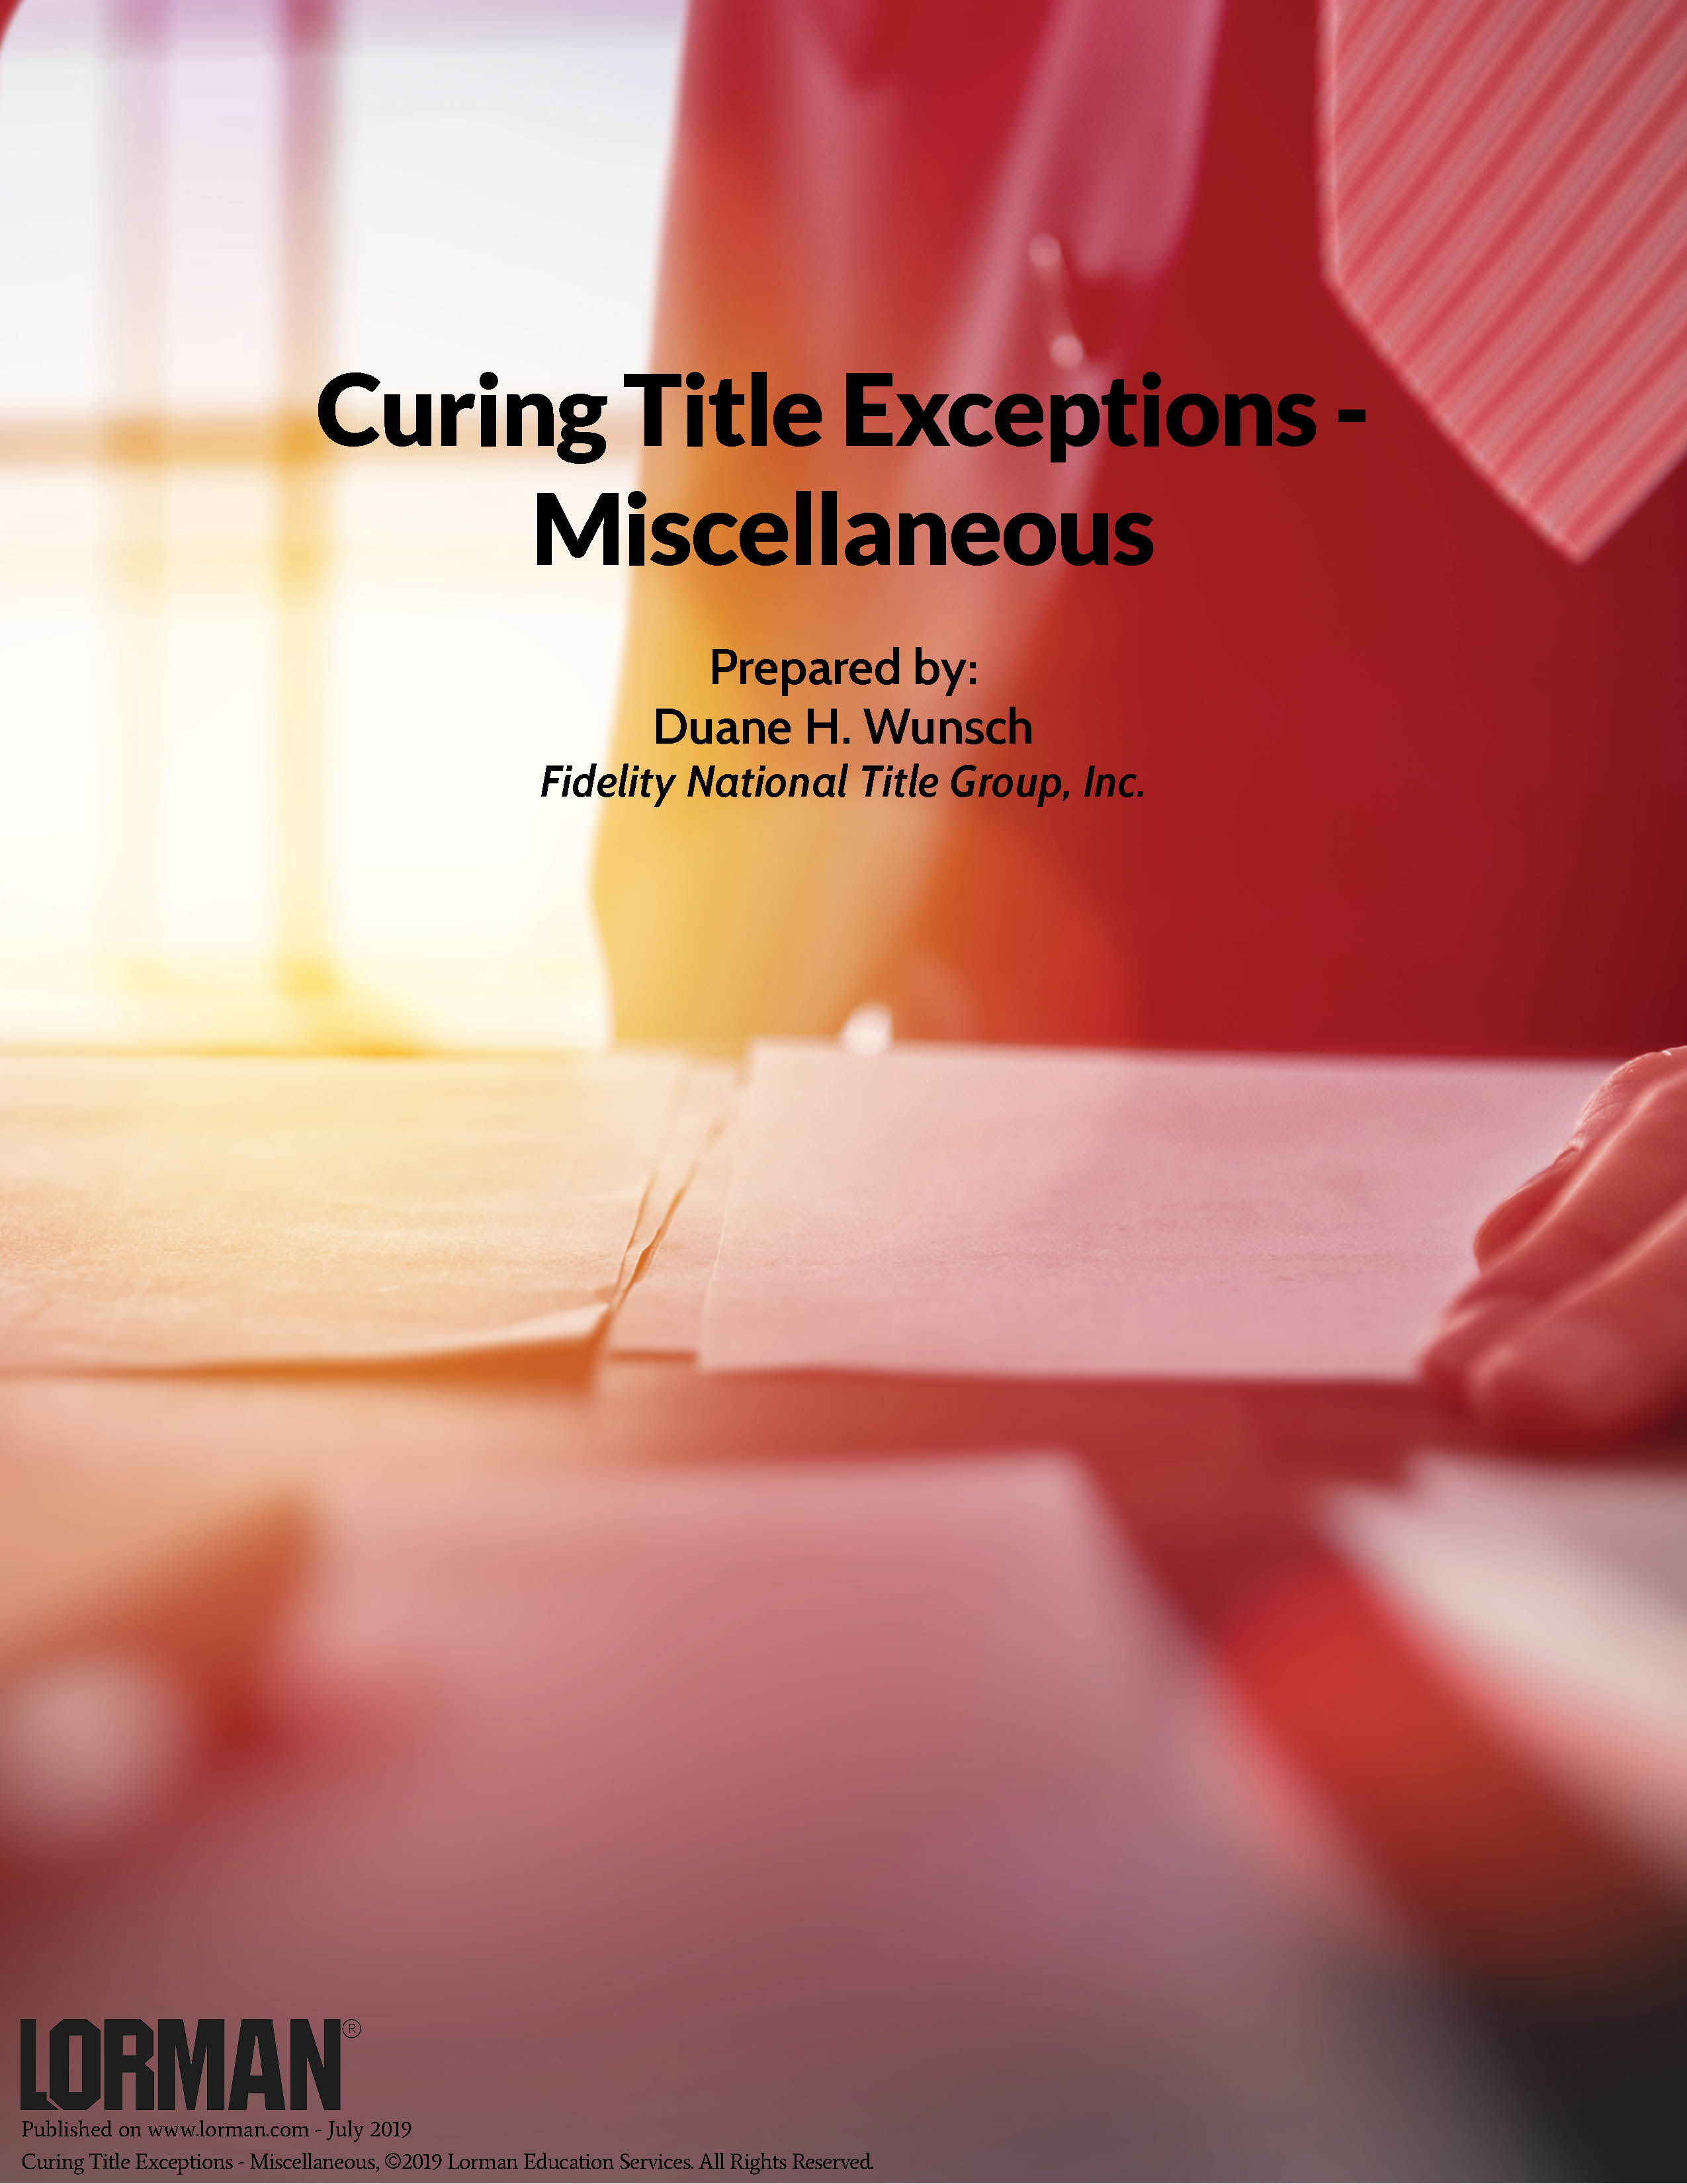 Curing Title Exceptions - Miscellaneous